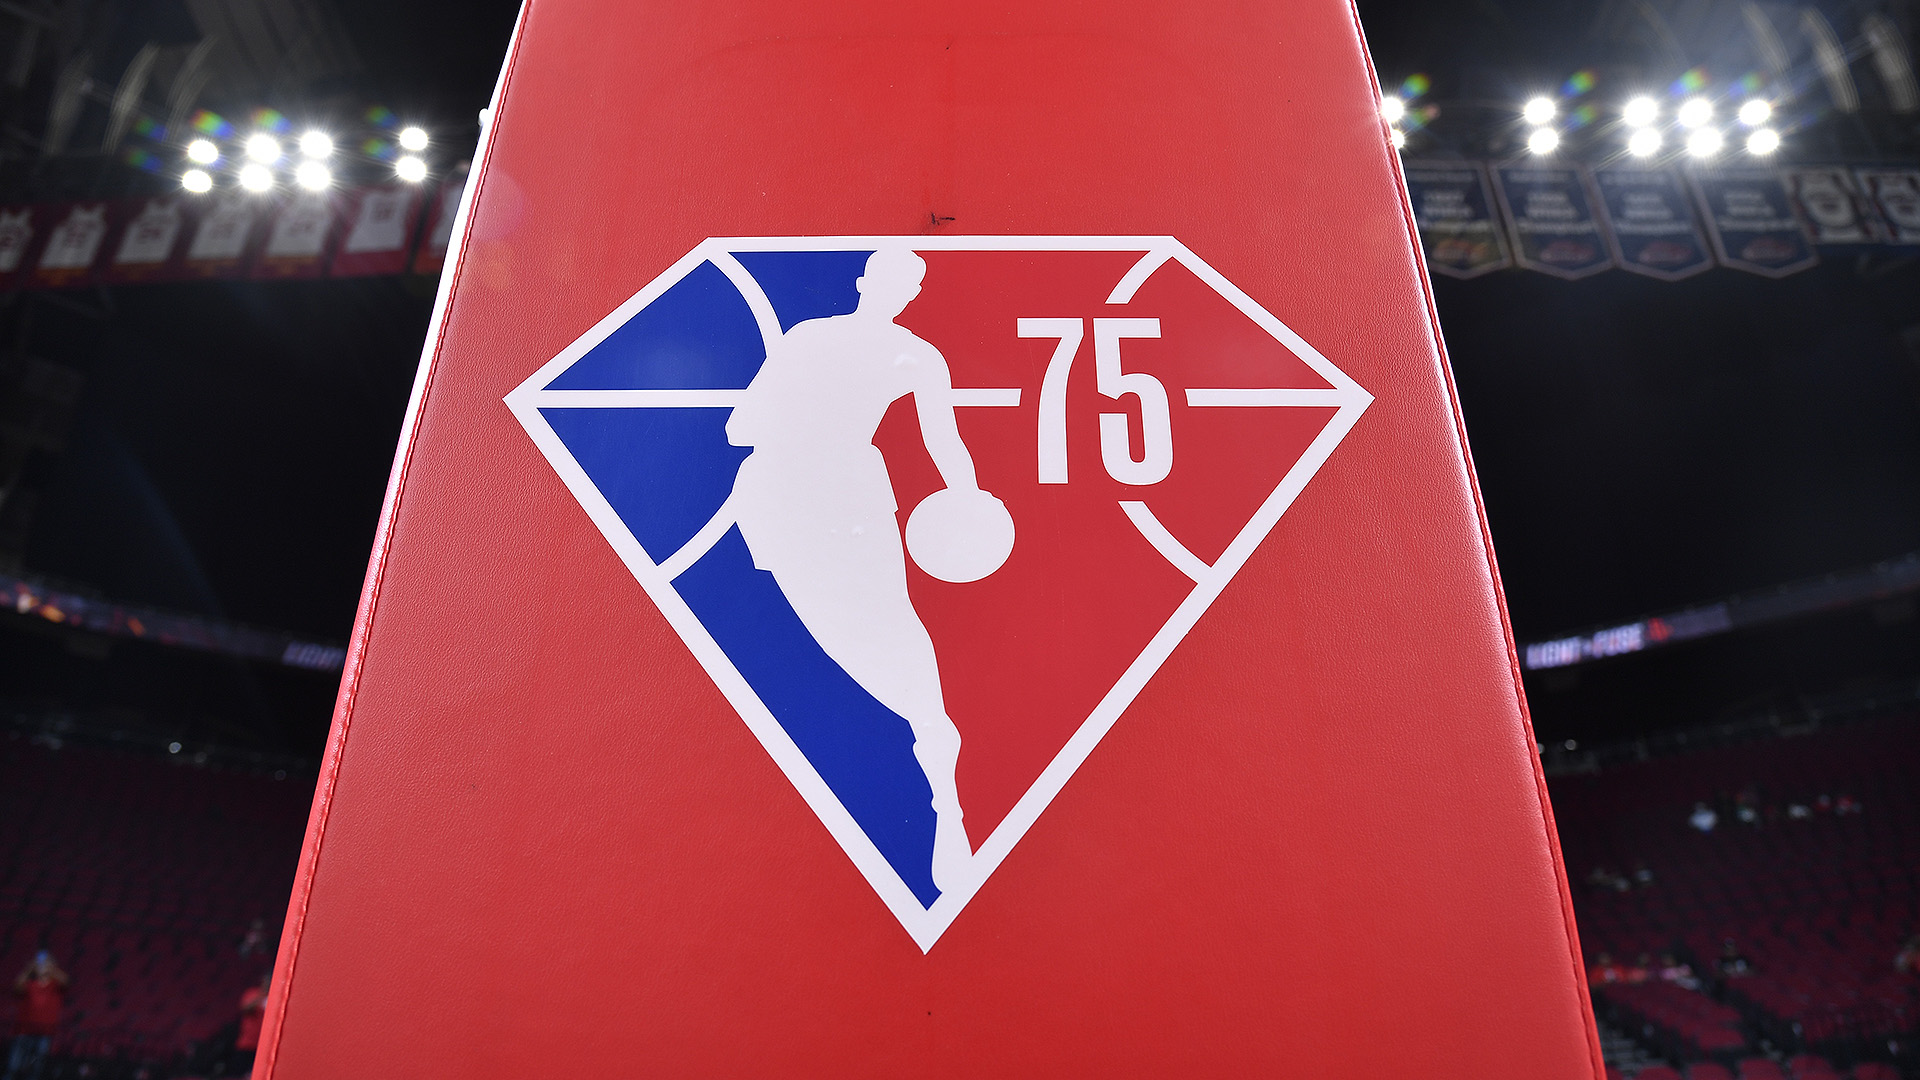 Twitter reacts to final players named to NBA 75th Anniversary Team